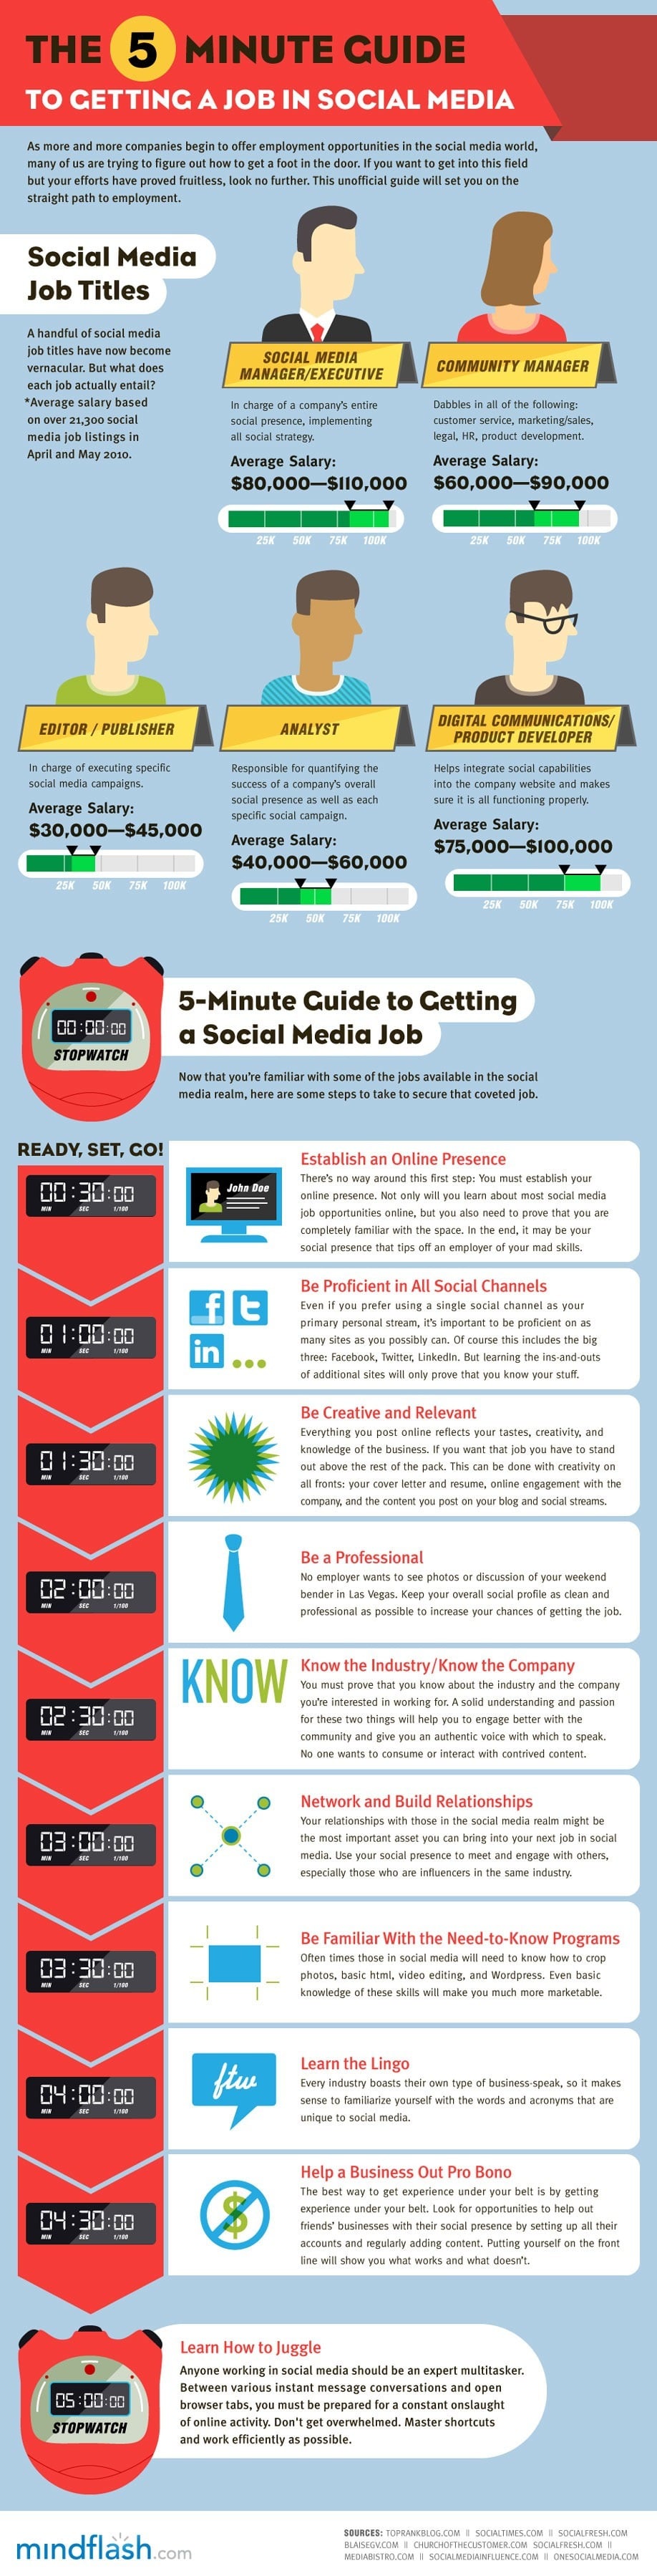 5 Minute Guide To Getting A Job Working In Social Media [Infographic]